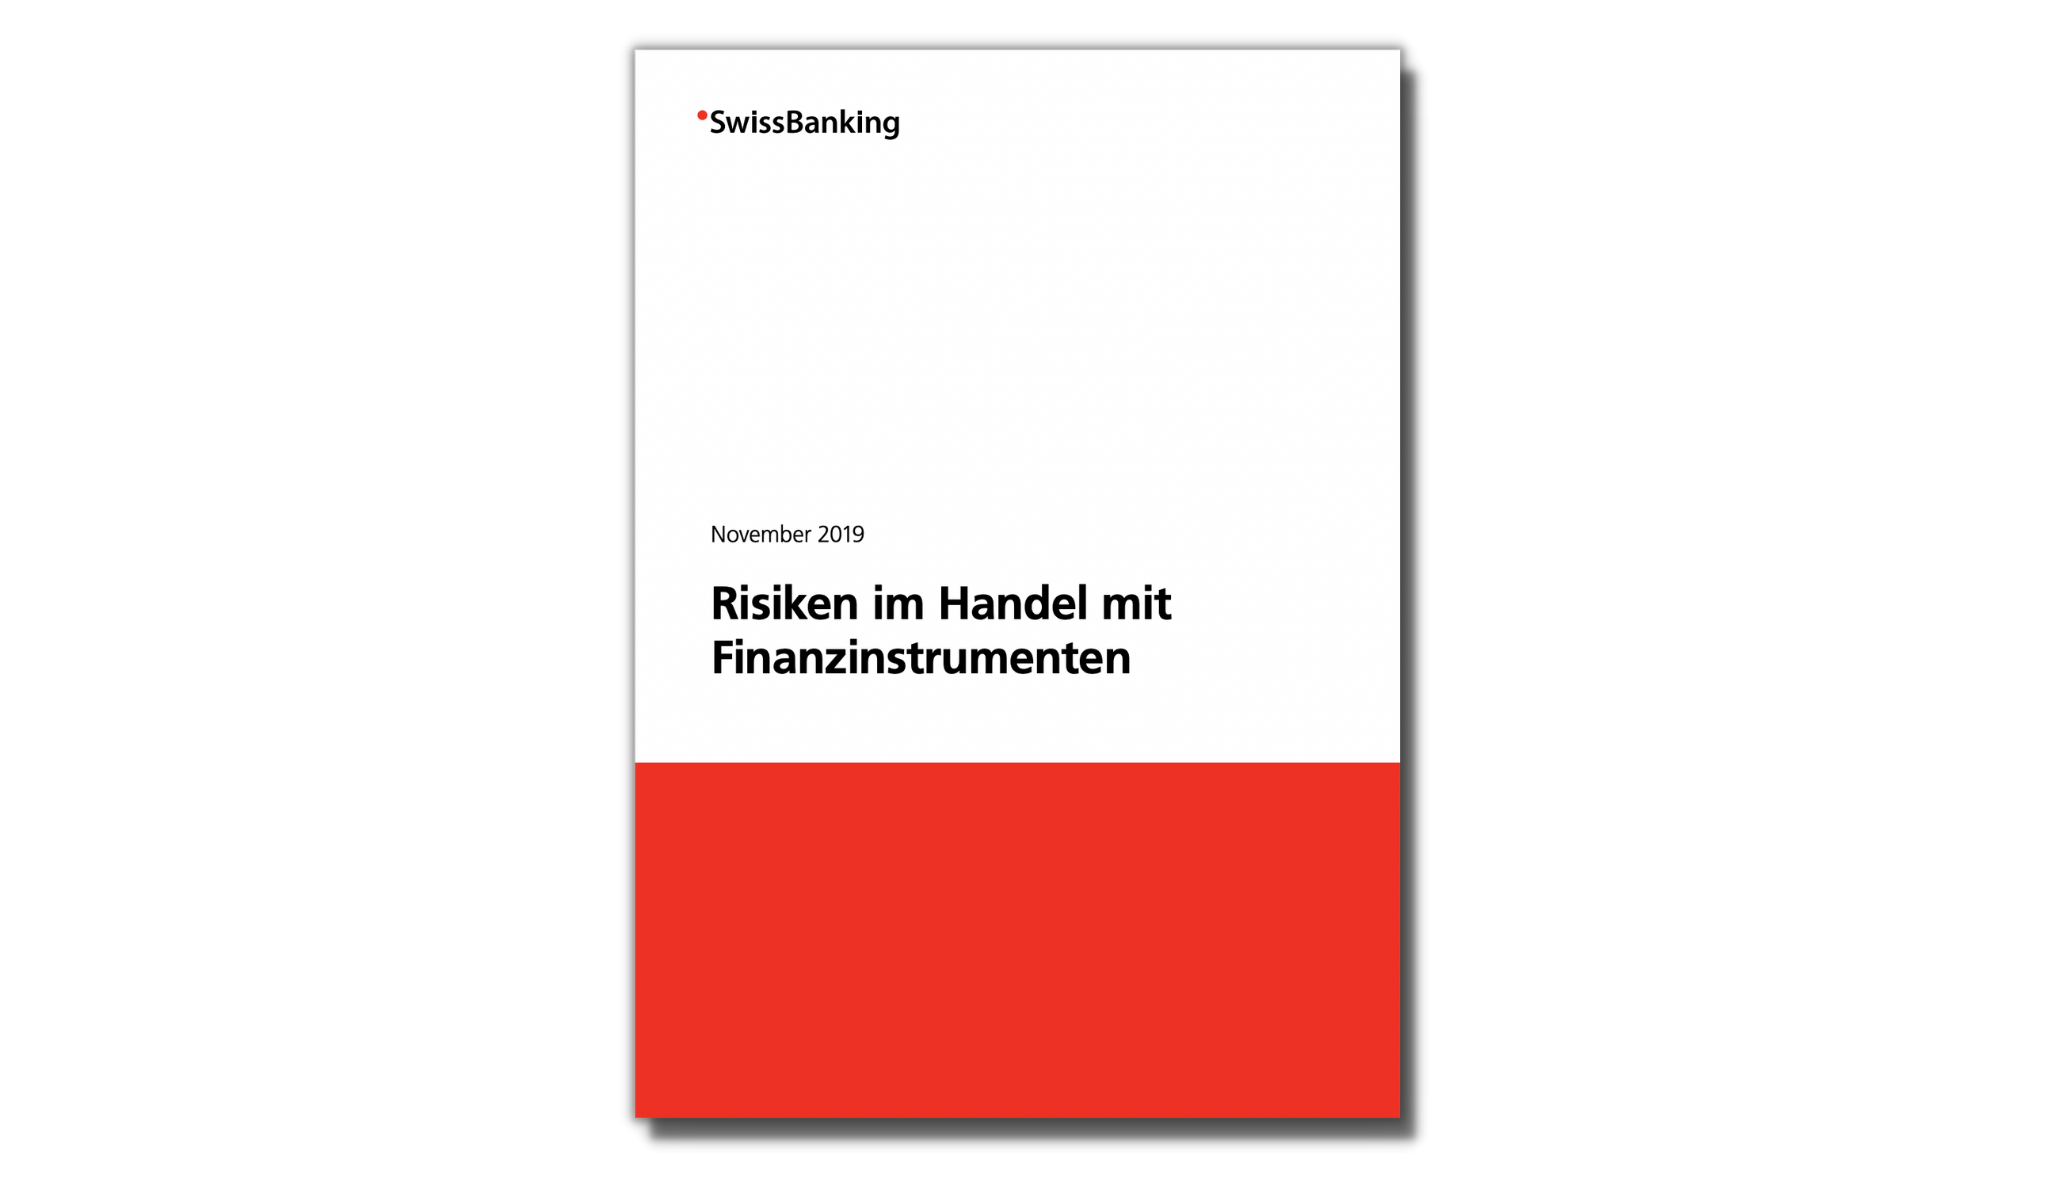 Information on the risks in trading with financial instruments (German only)